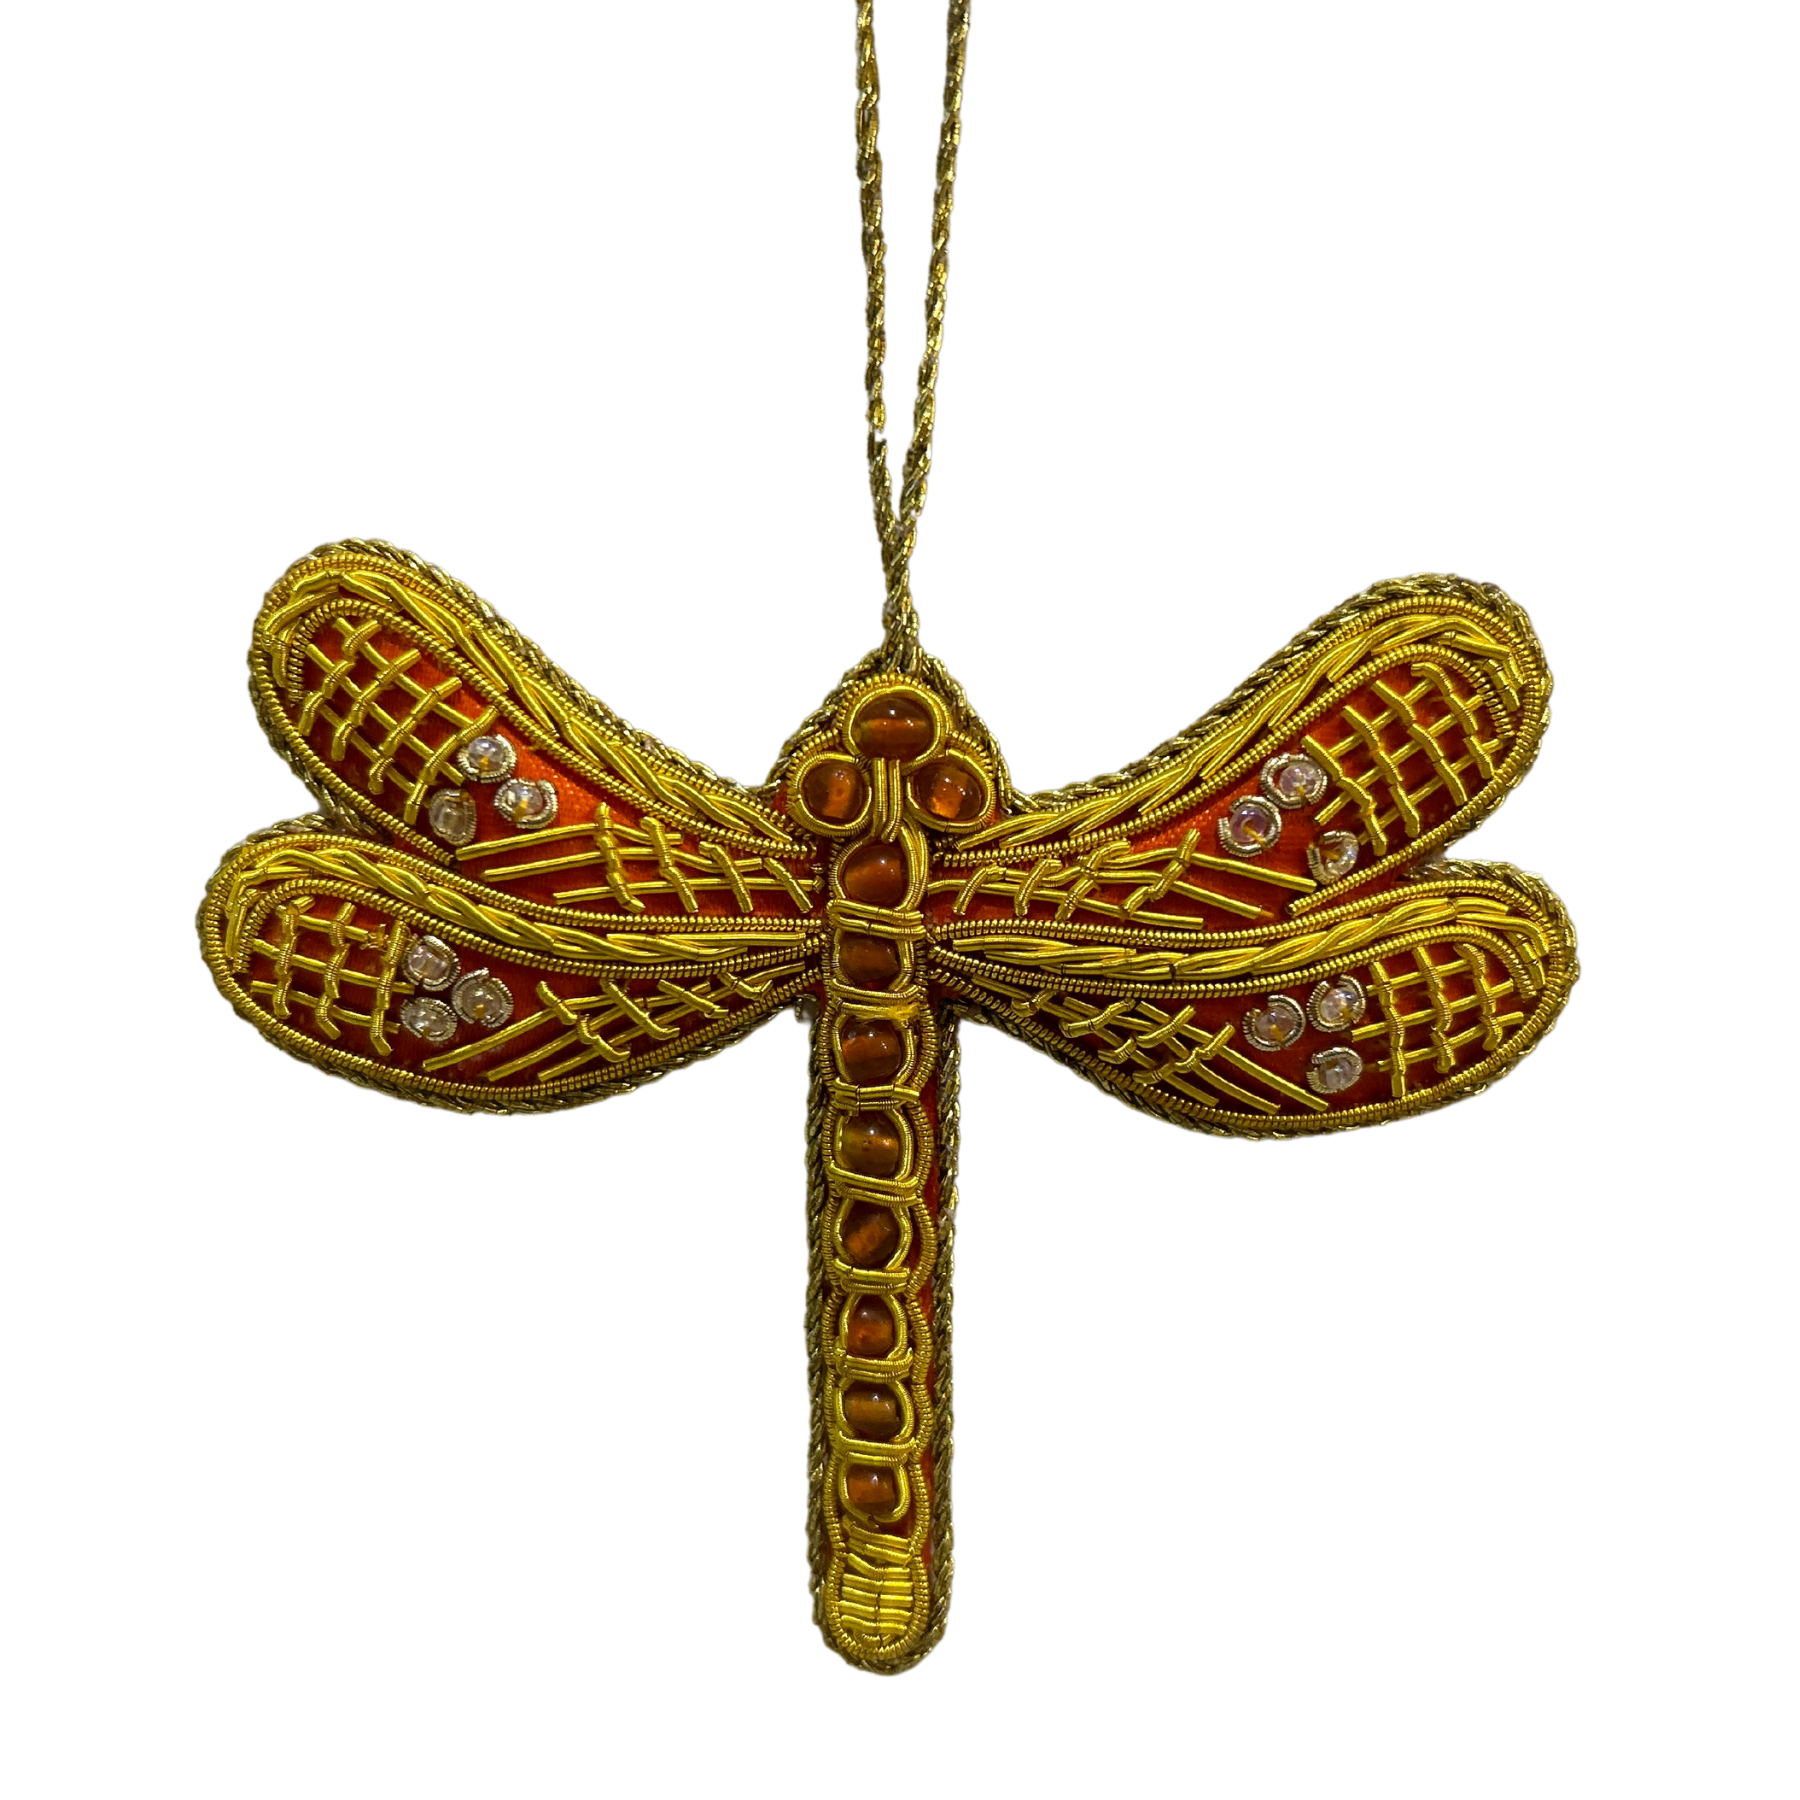 Orange and Gold Dragonfly Ornament